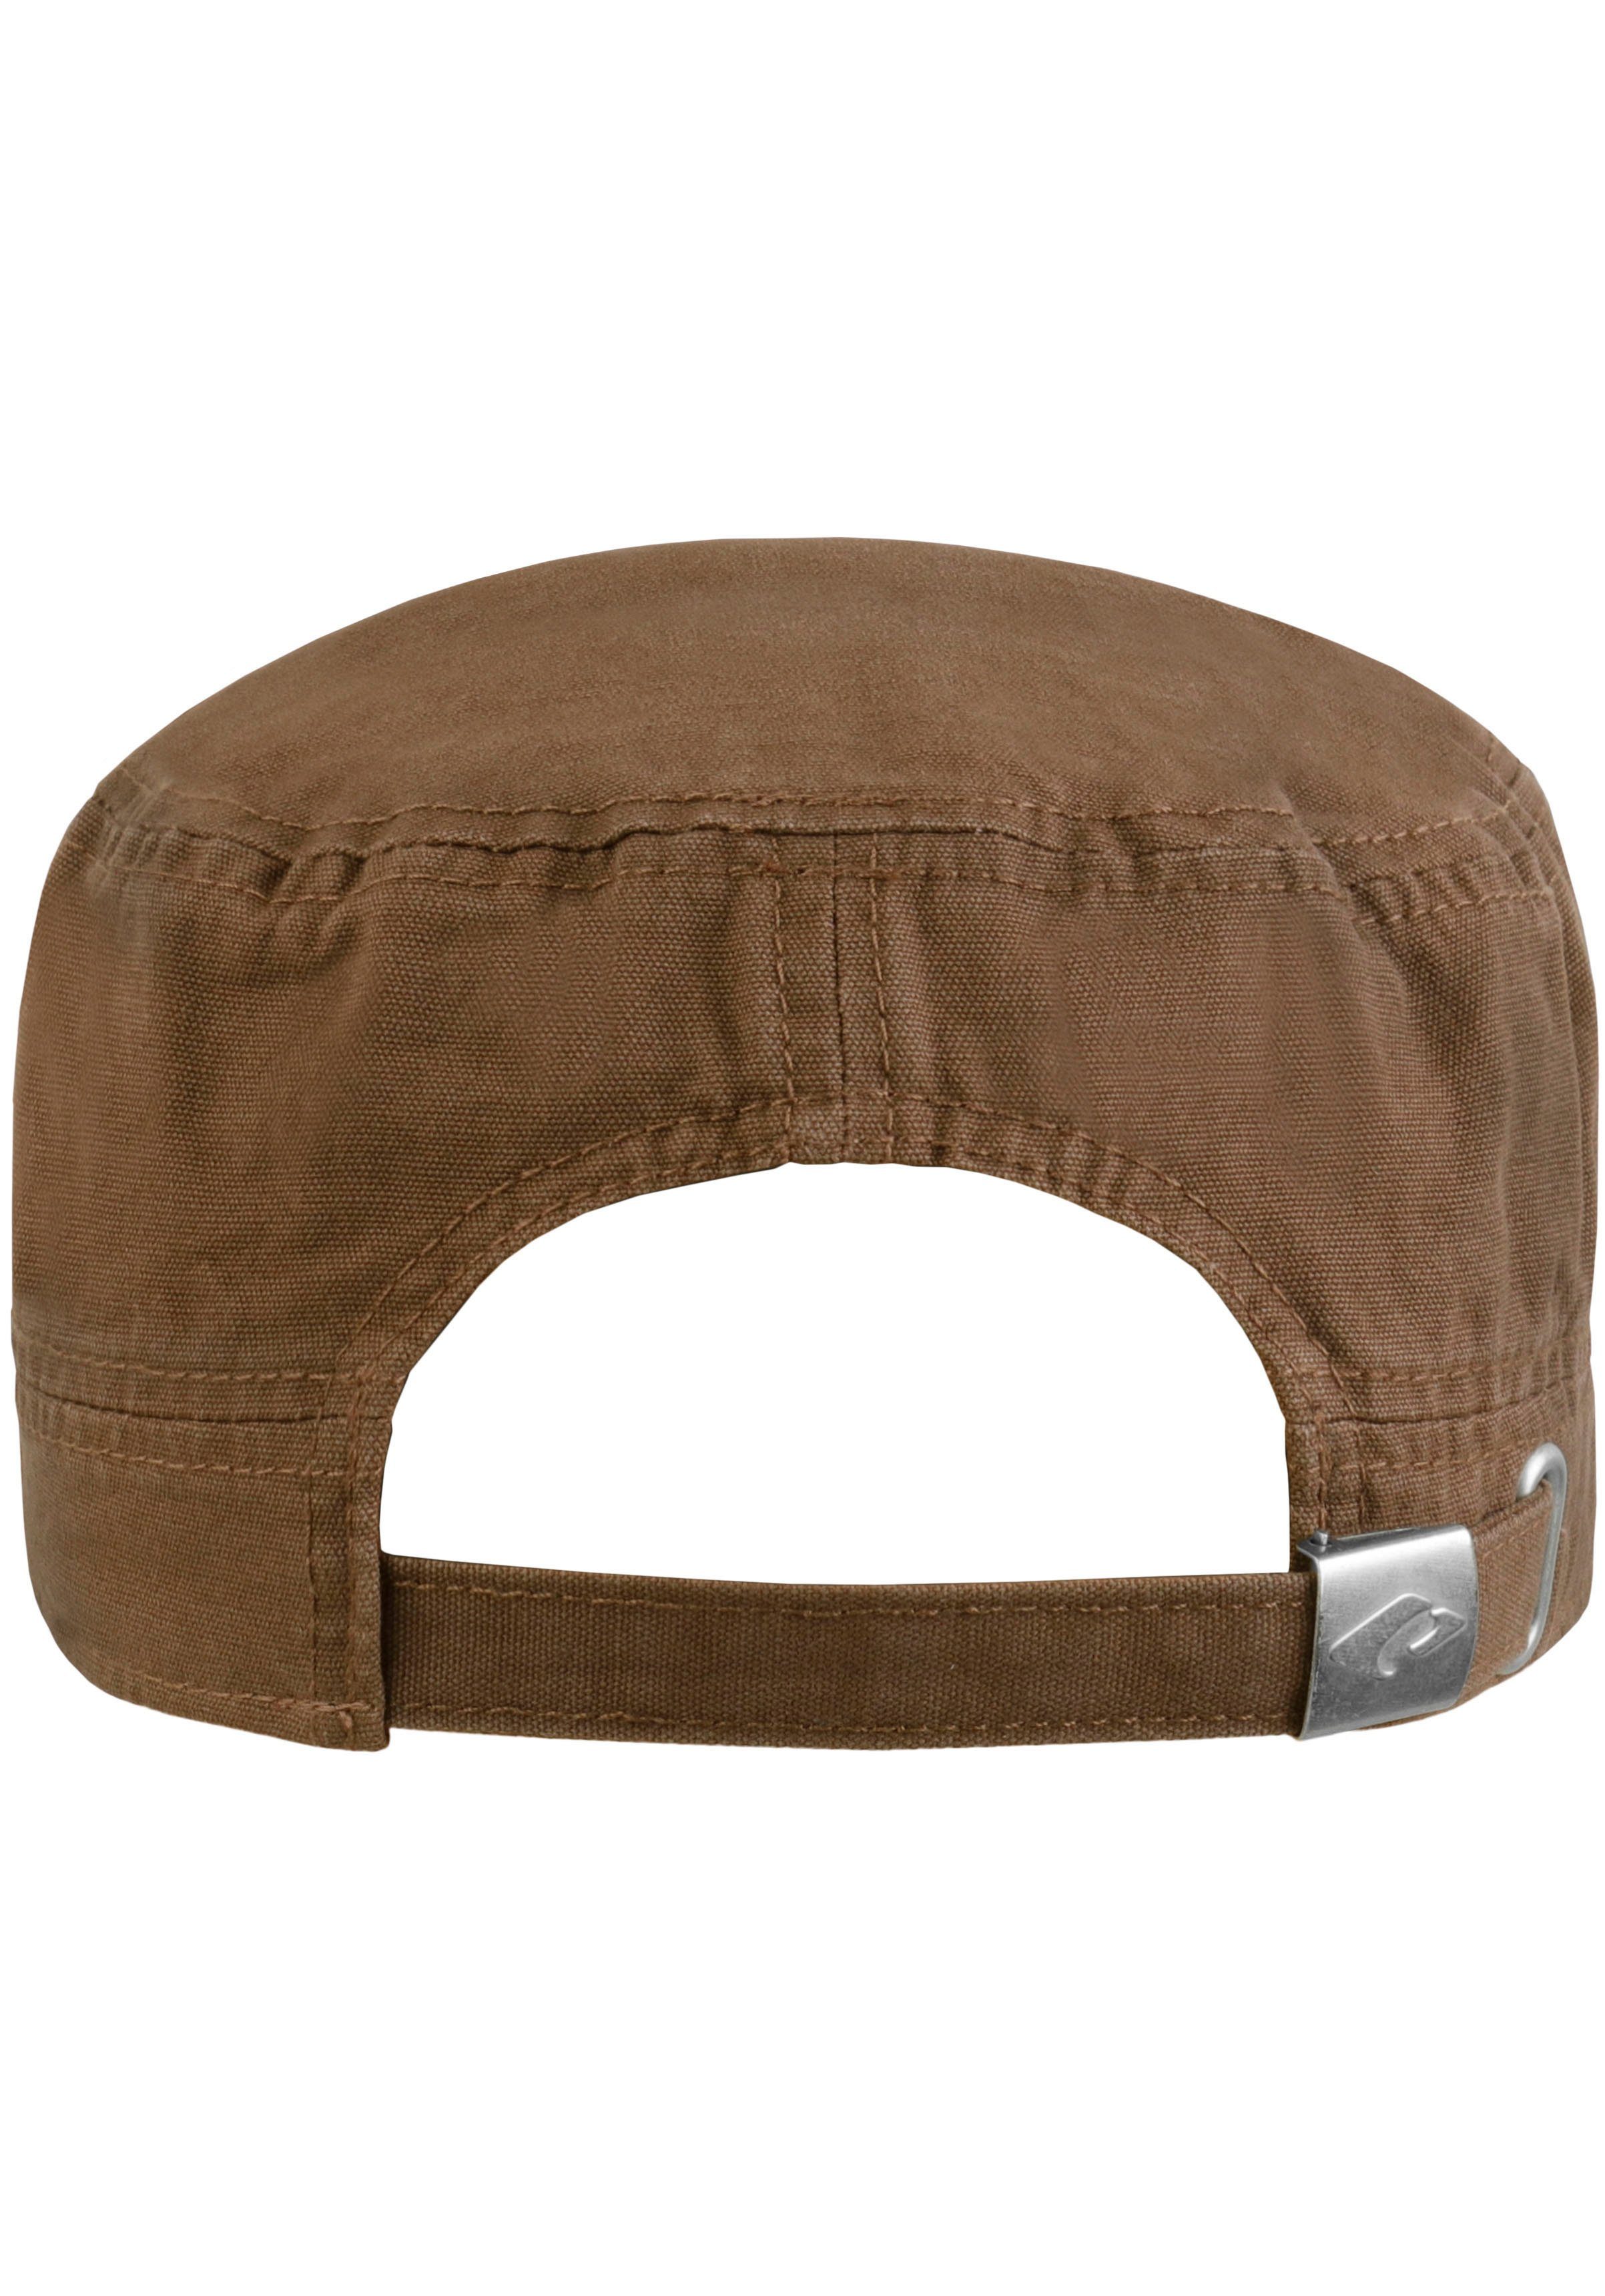 chillouts Army Cap Dublin Hat braun Mililtary-Style Cap im